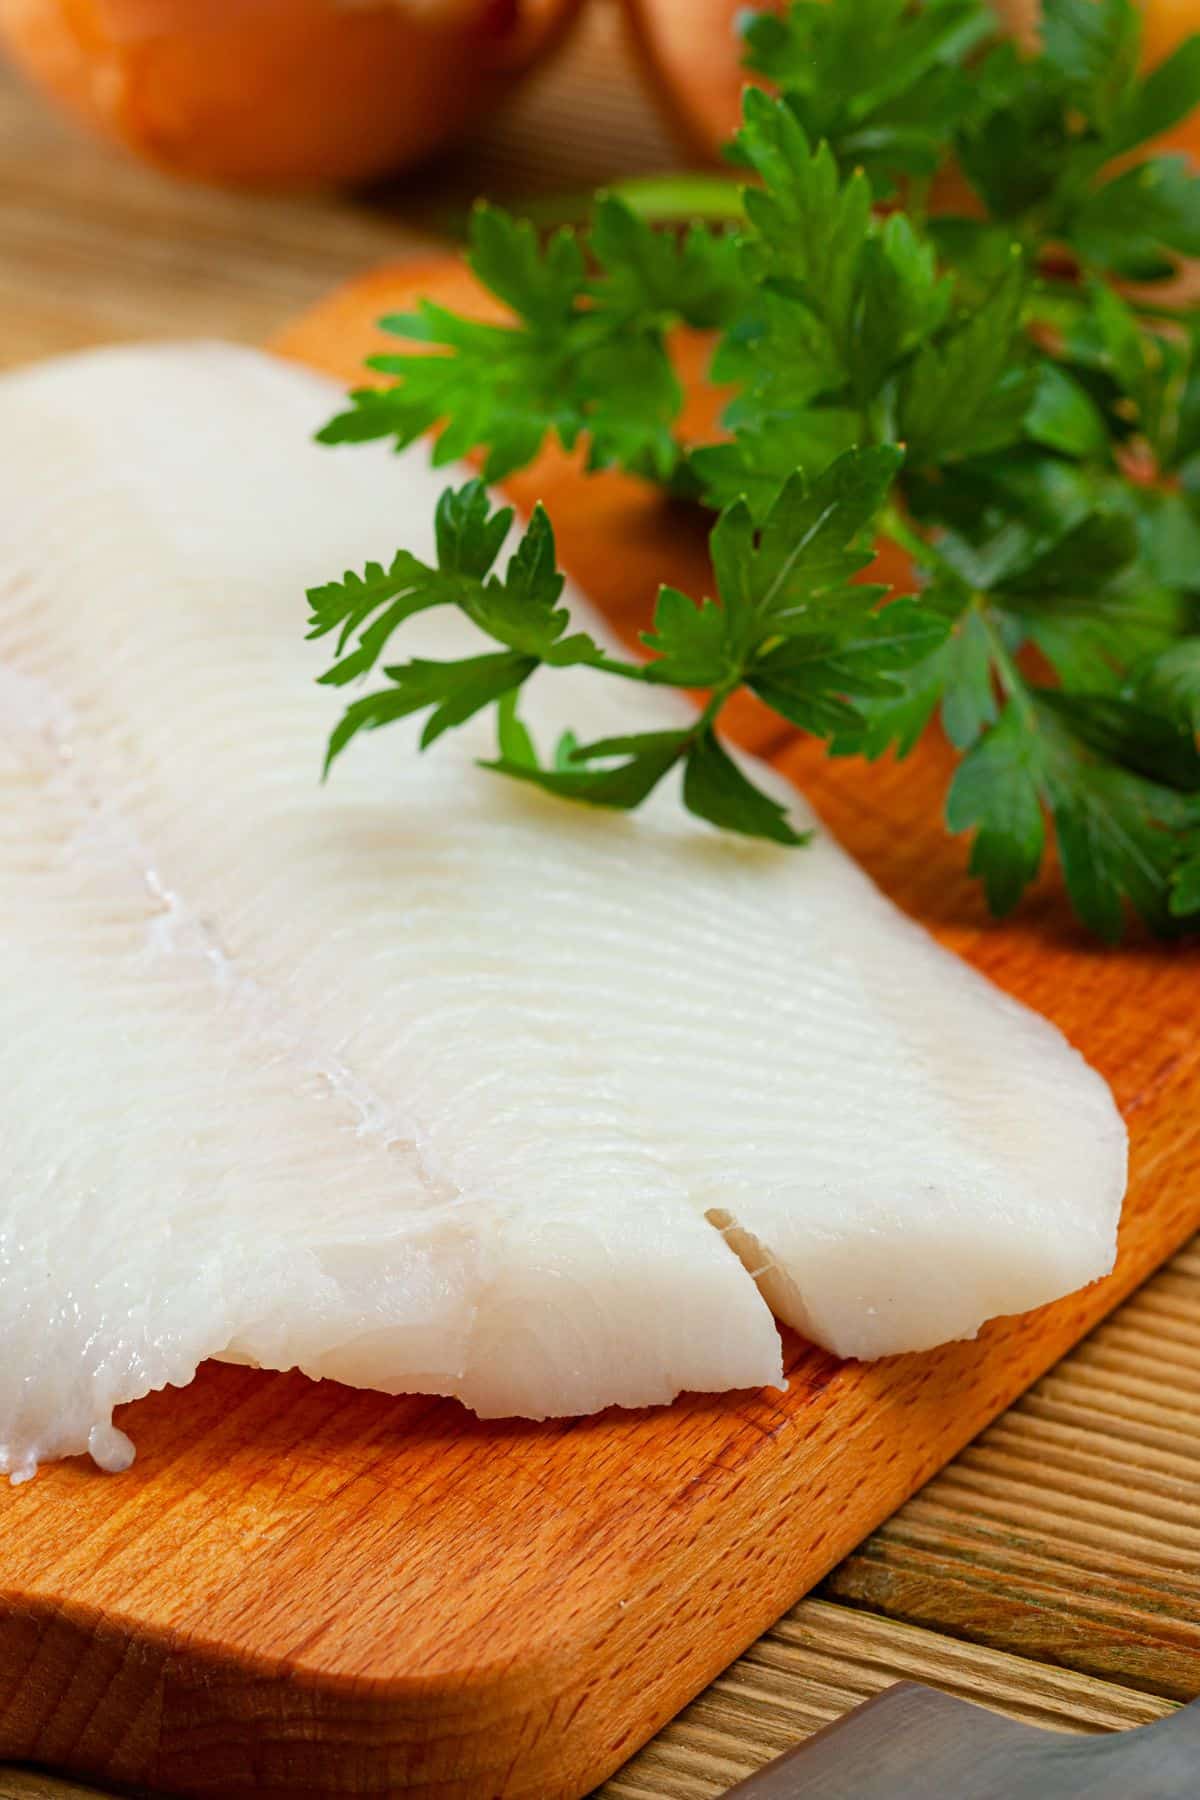 Halibut fillet with fresh parsley on wooden cutting board.